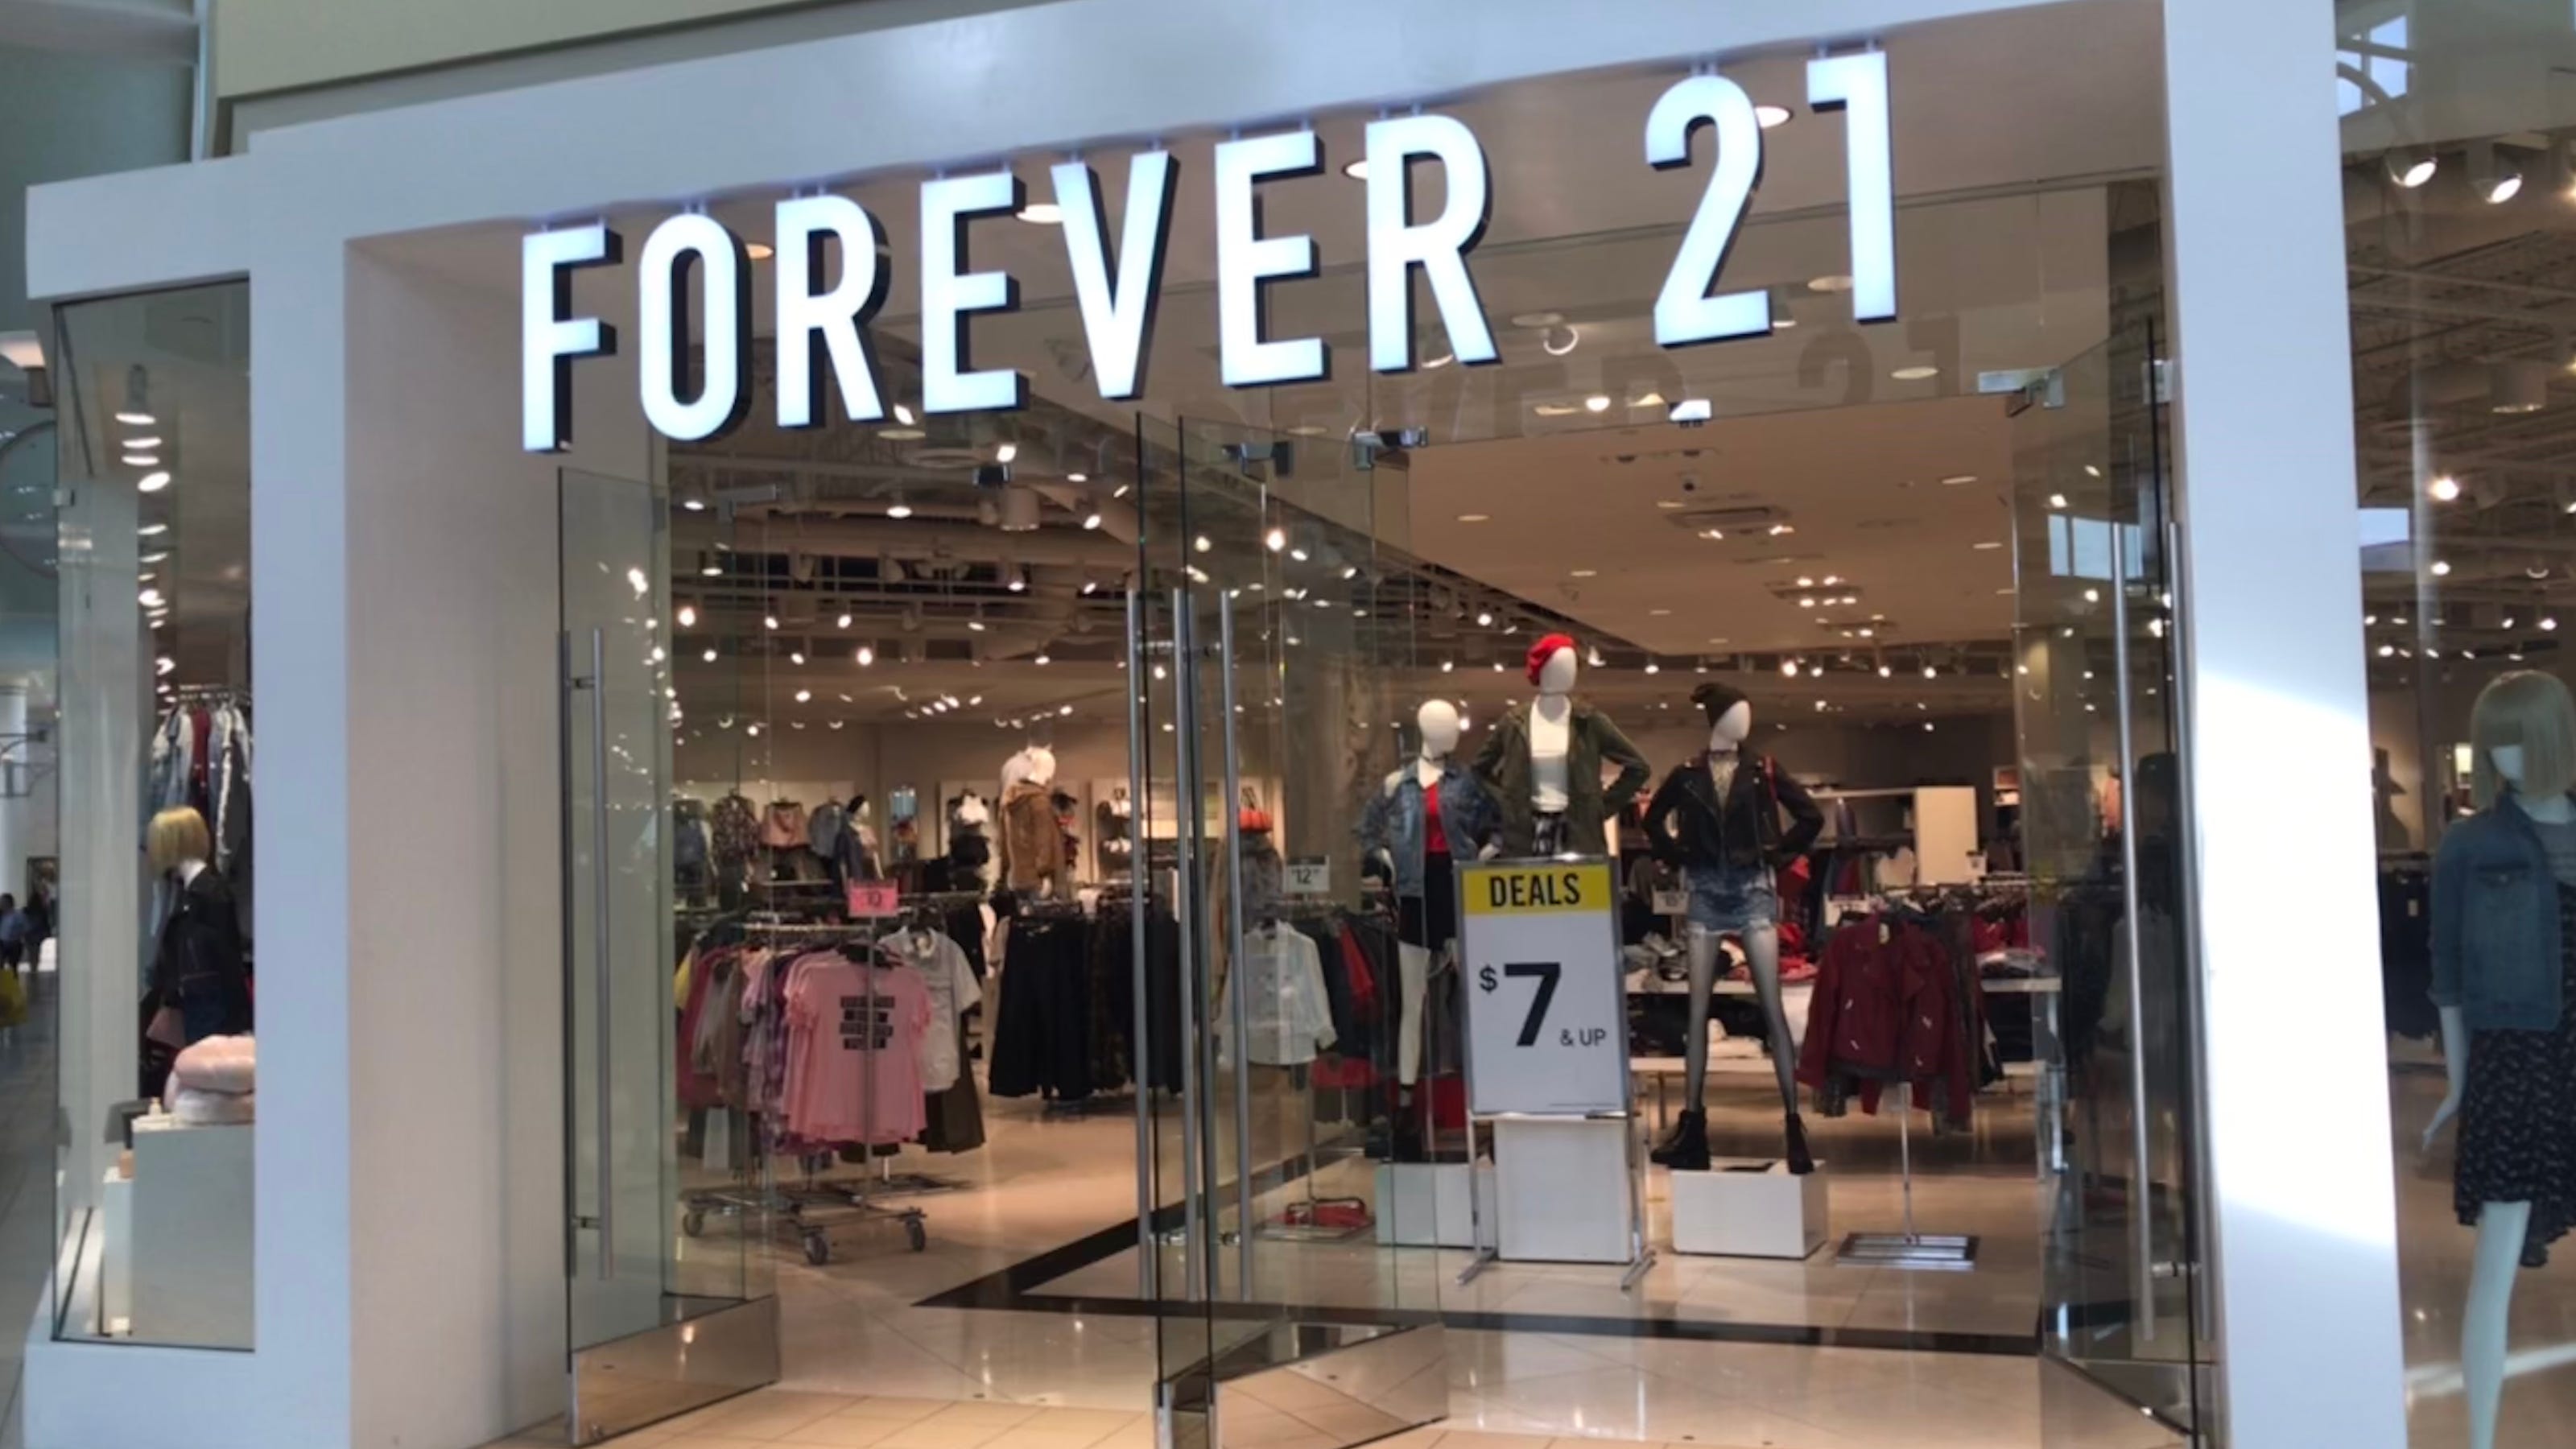 Forever 21 Bankruptcy 2019 Teen Retailer Reportedly Preparing To File